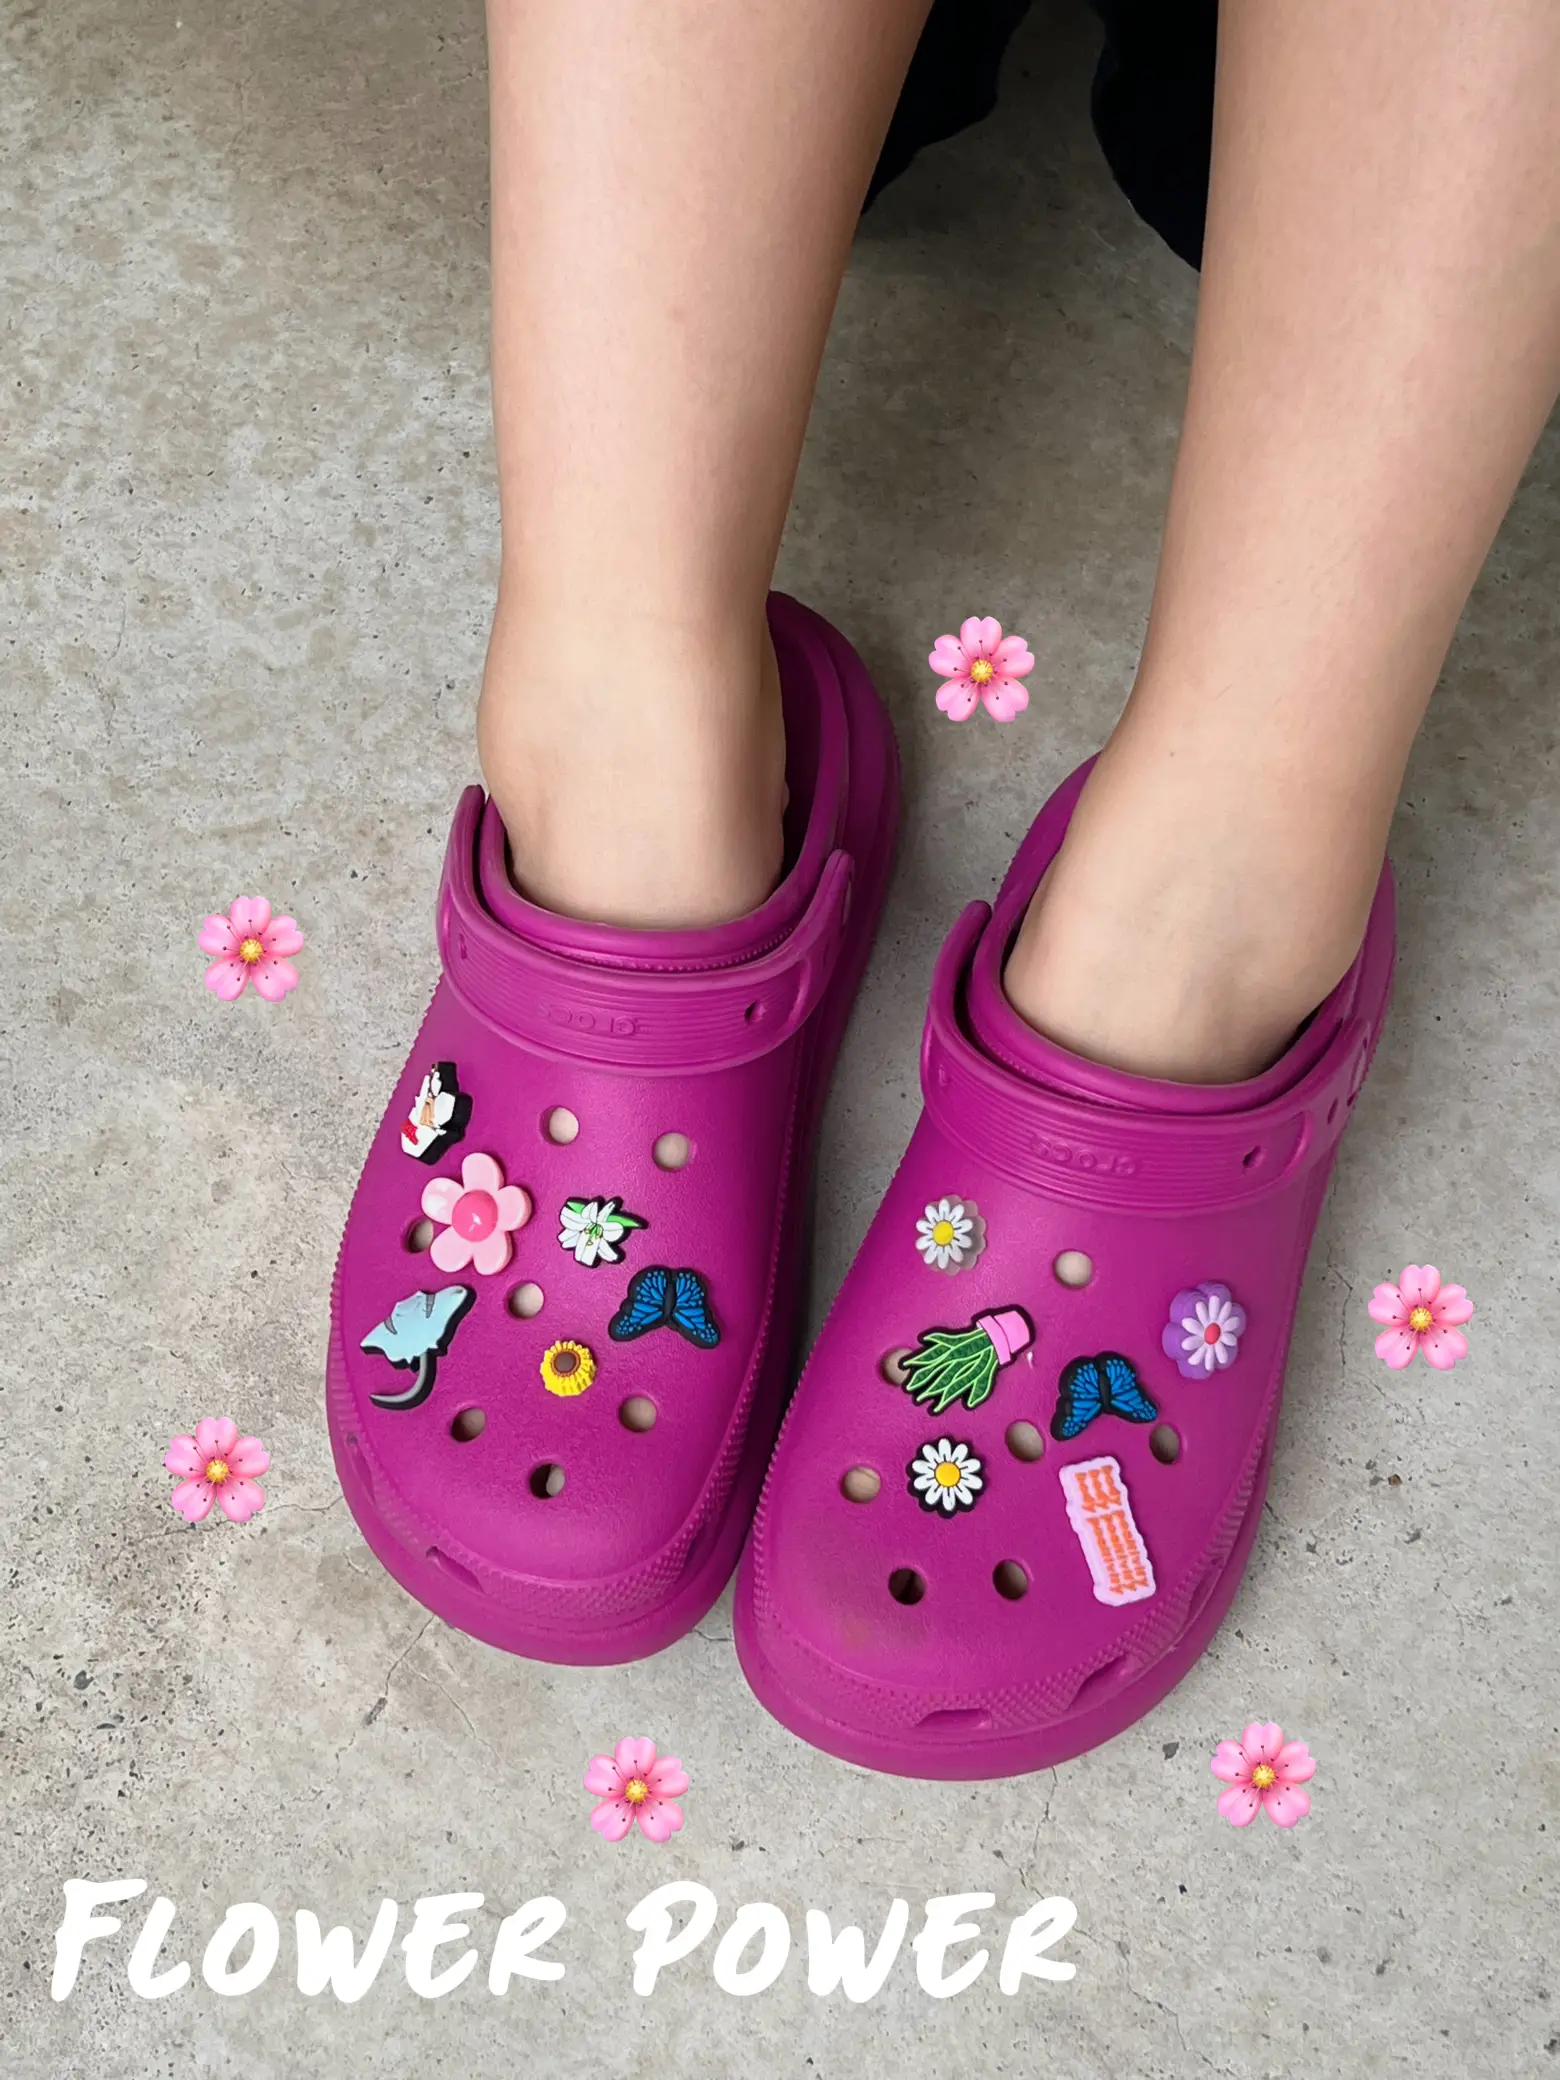 Cute jibbitz design ideas for your crocs! 🐊🥿, Gallery posted by megu